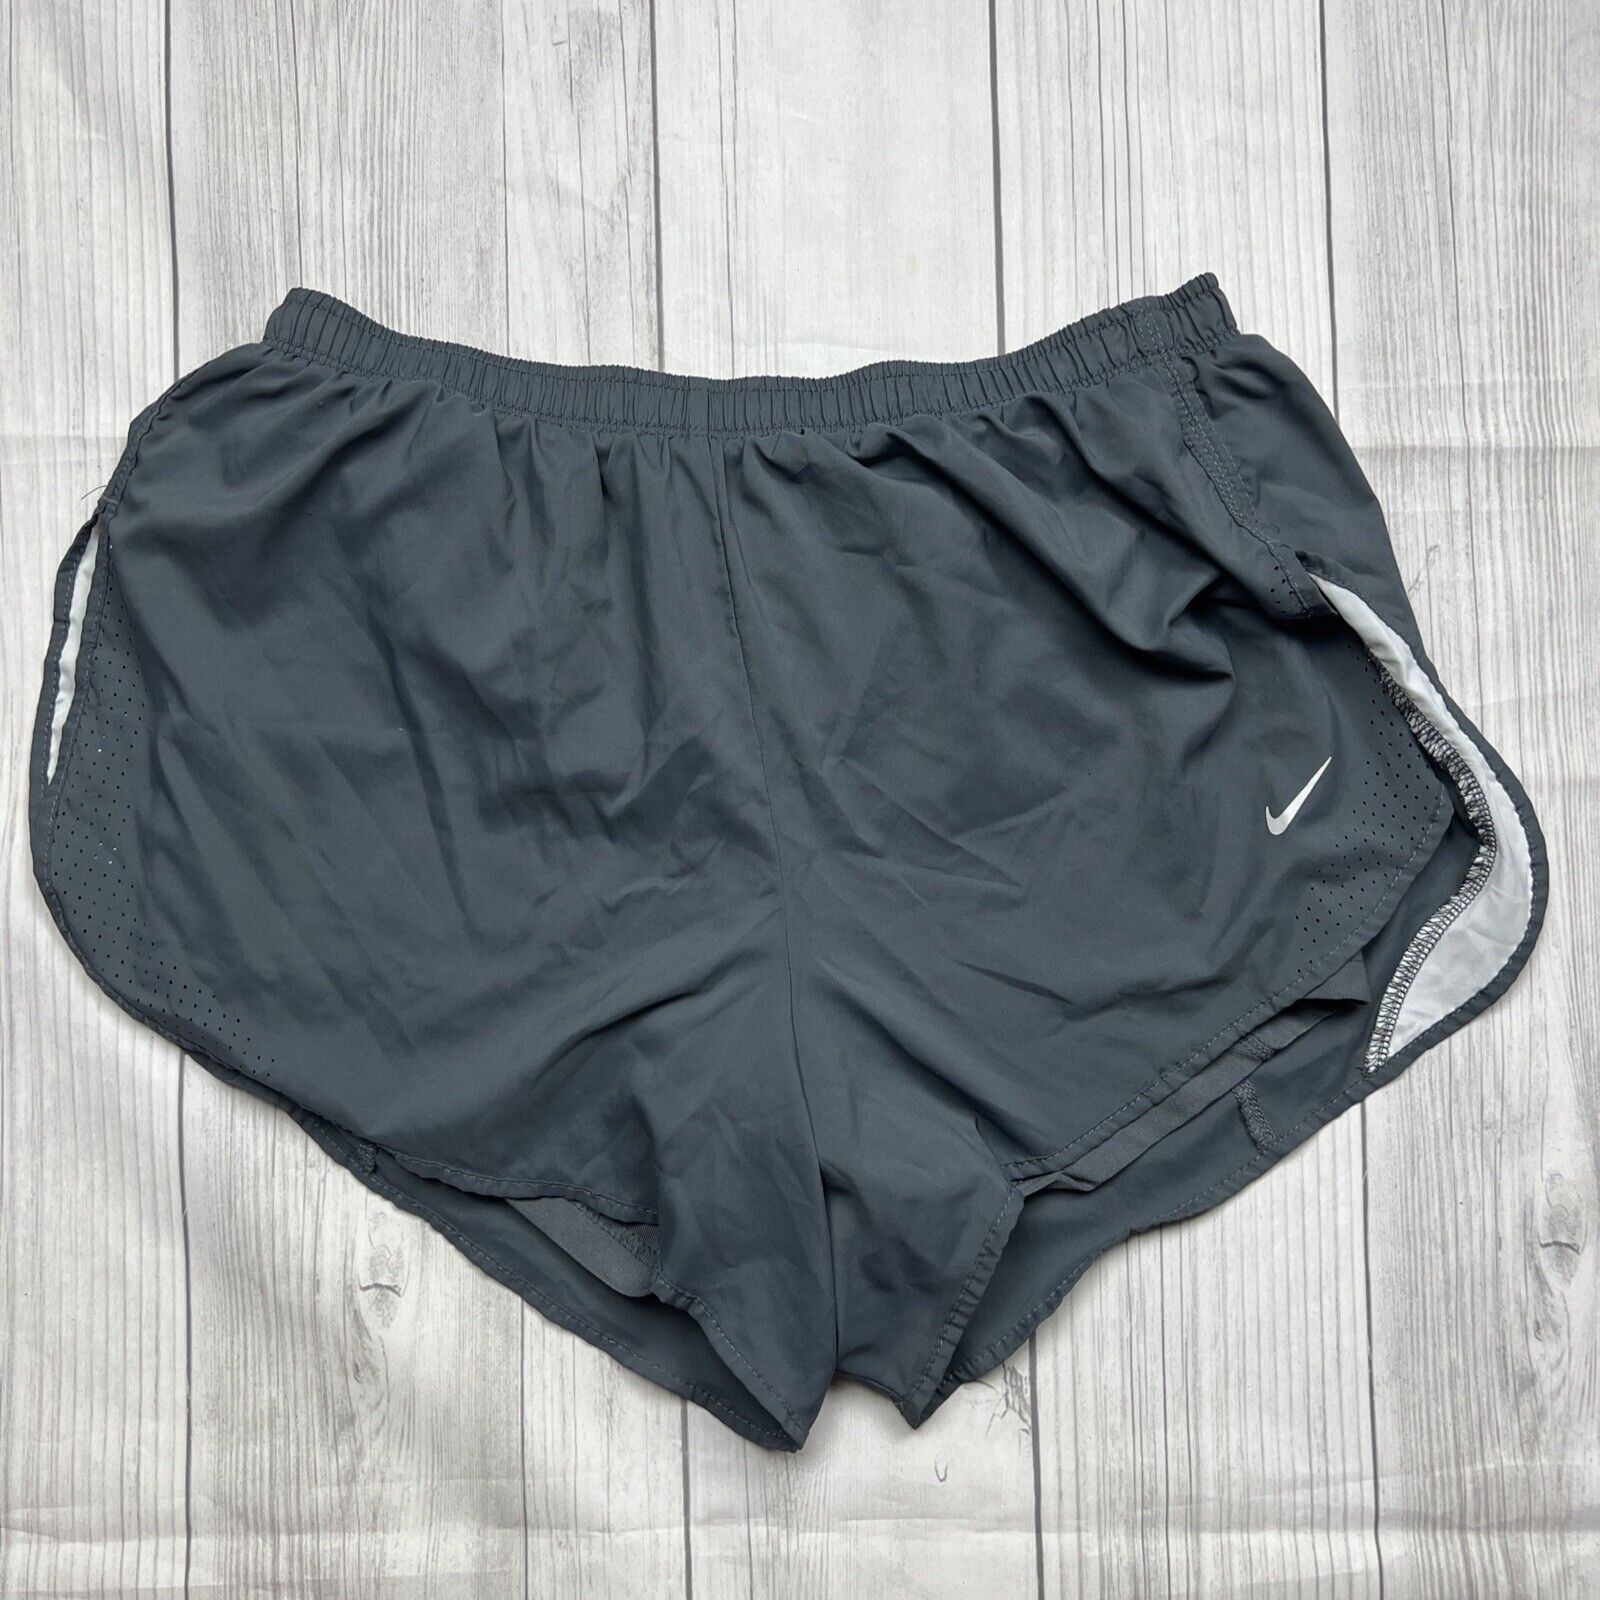 Nike Dri Fit Athletic Nike Fit Dry Gray Built In Brief Women’s Size Large